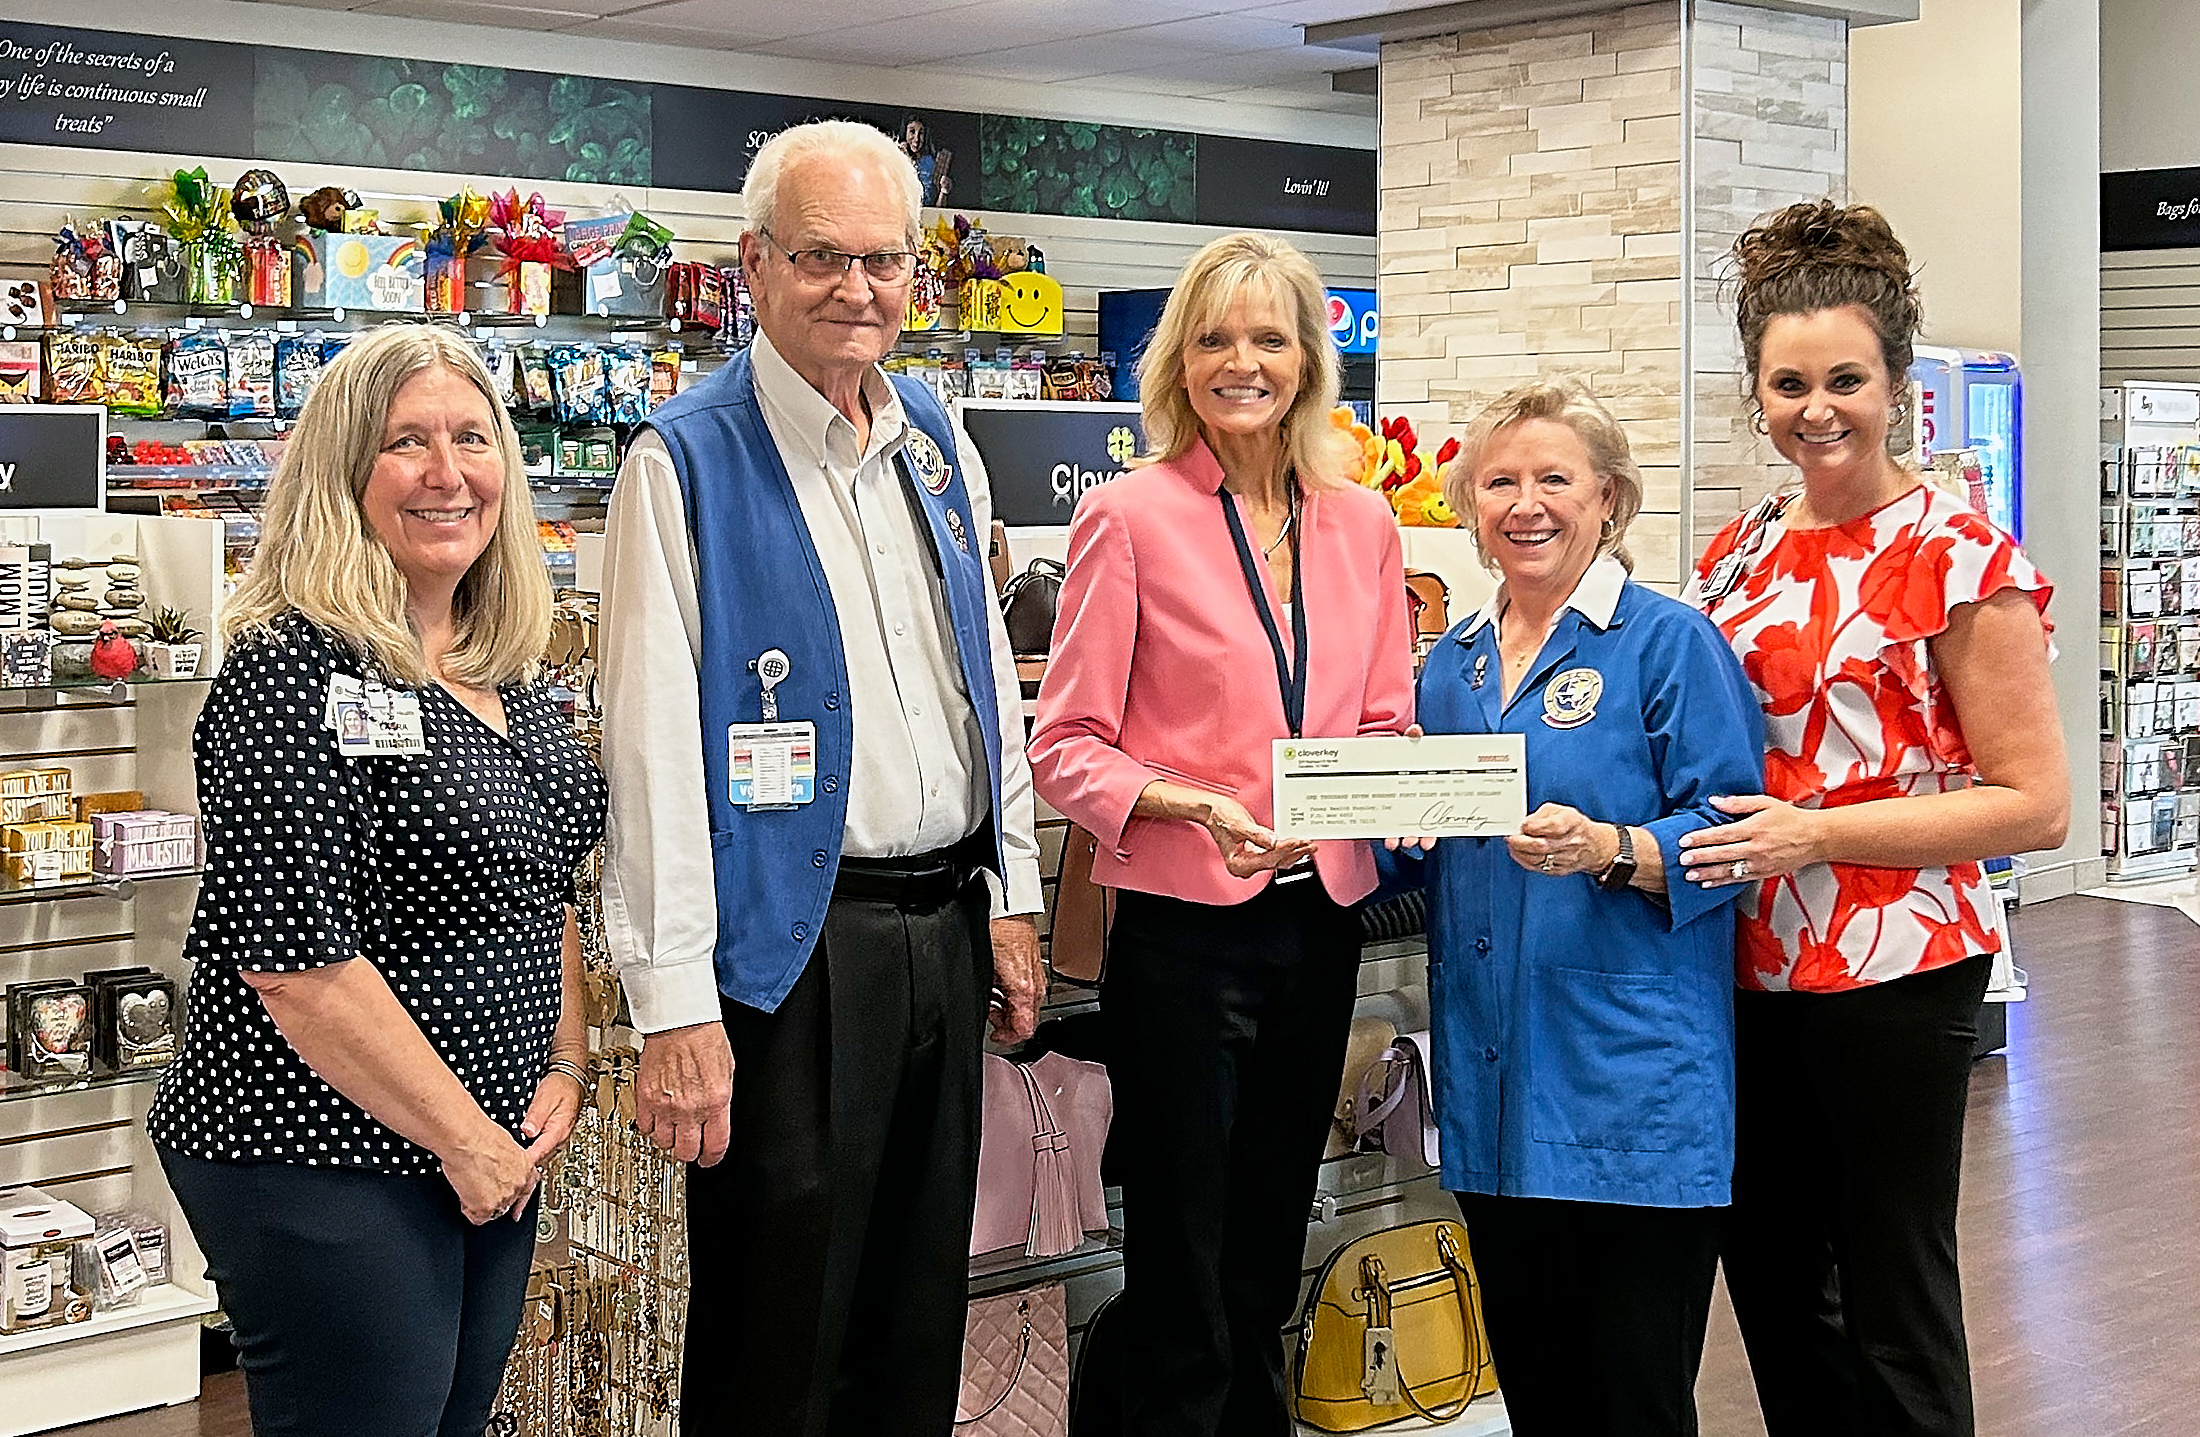 Cloverkey's Chief Revenue Officer presents a commission check to volunteers at the Texas Health Huguley gift shop